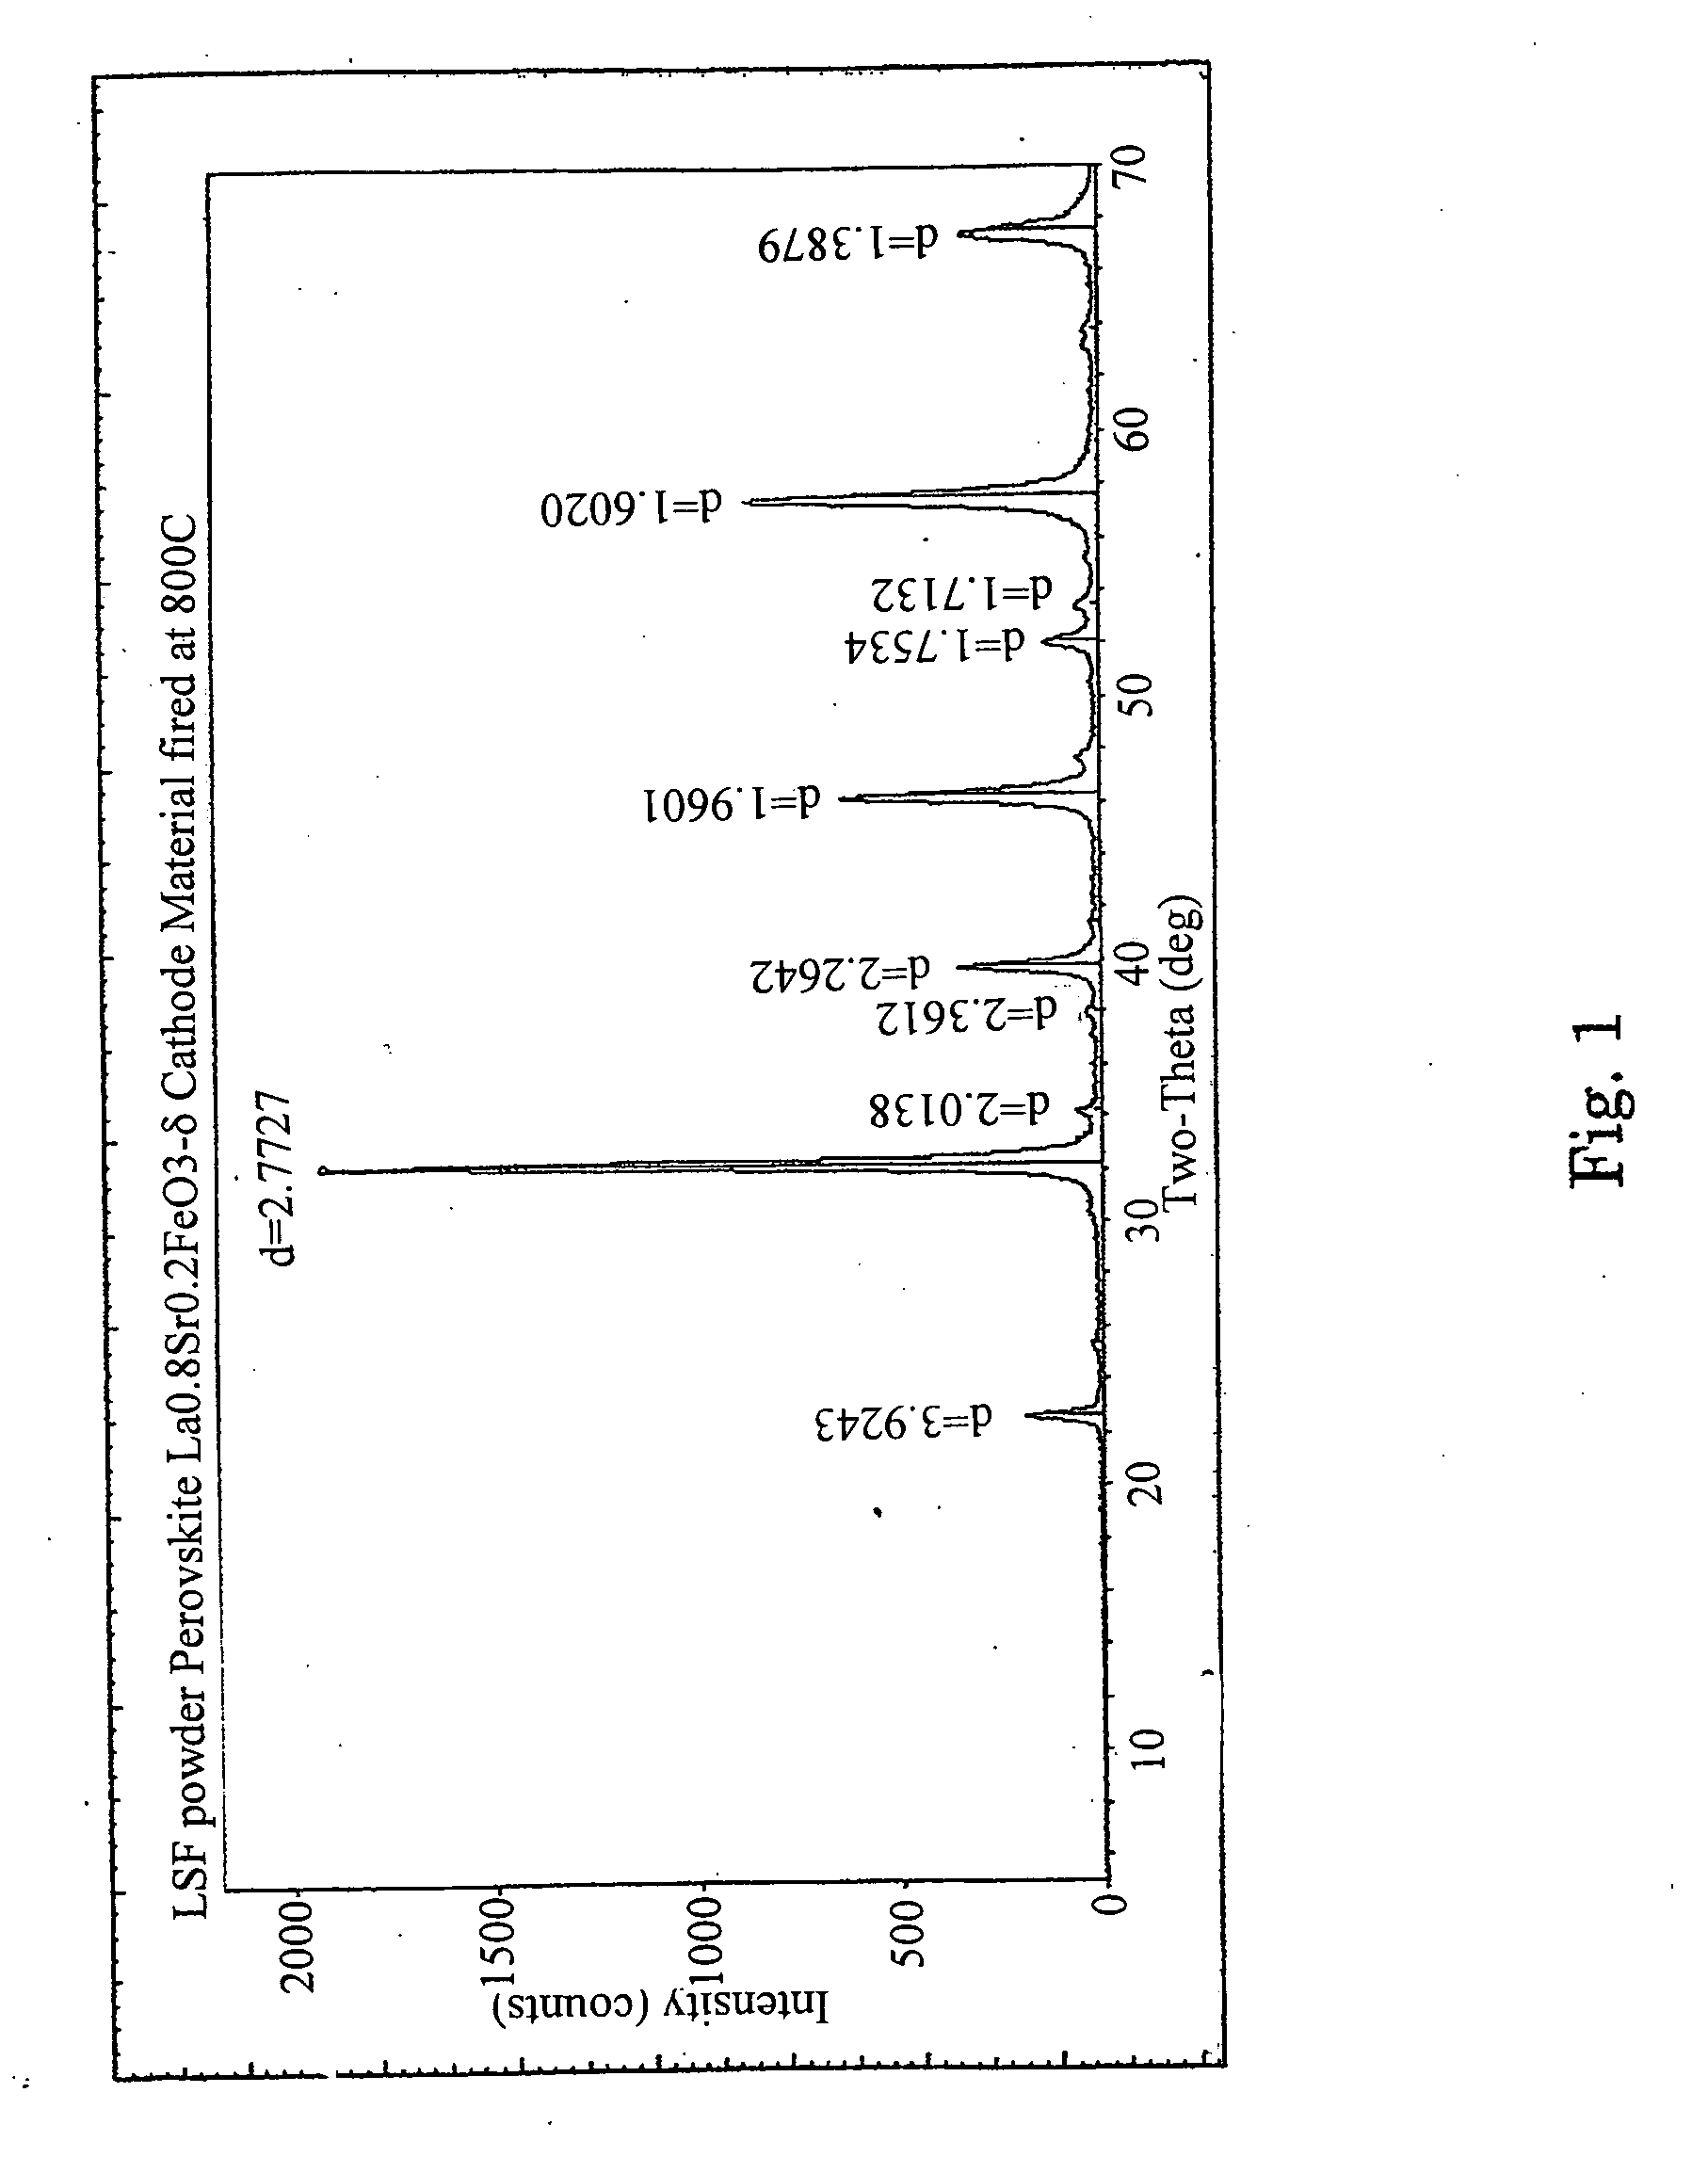 Sol-gel derived high performance catalyst thin films for sensors, oxygen separation devices, and solid oxide fuel cells